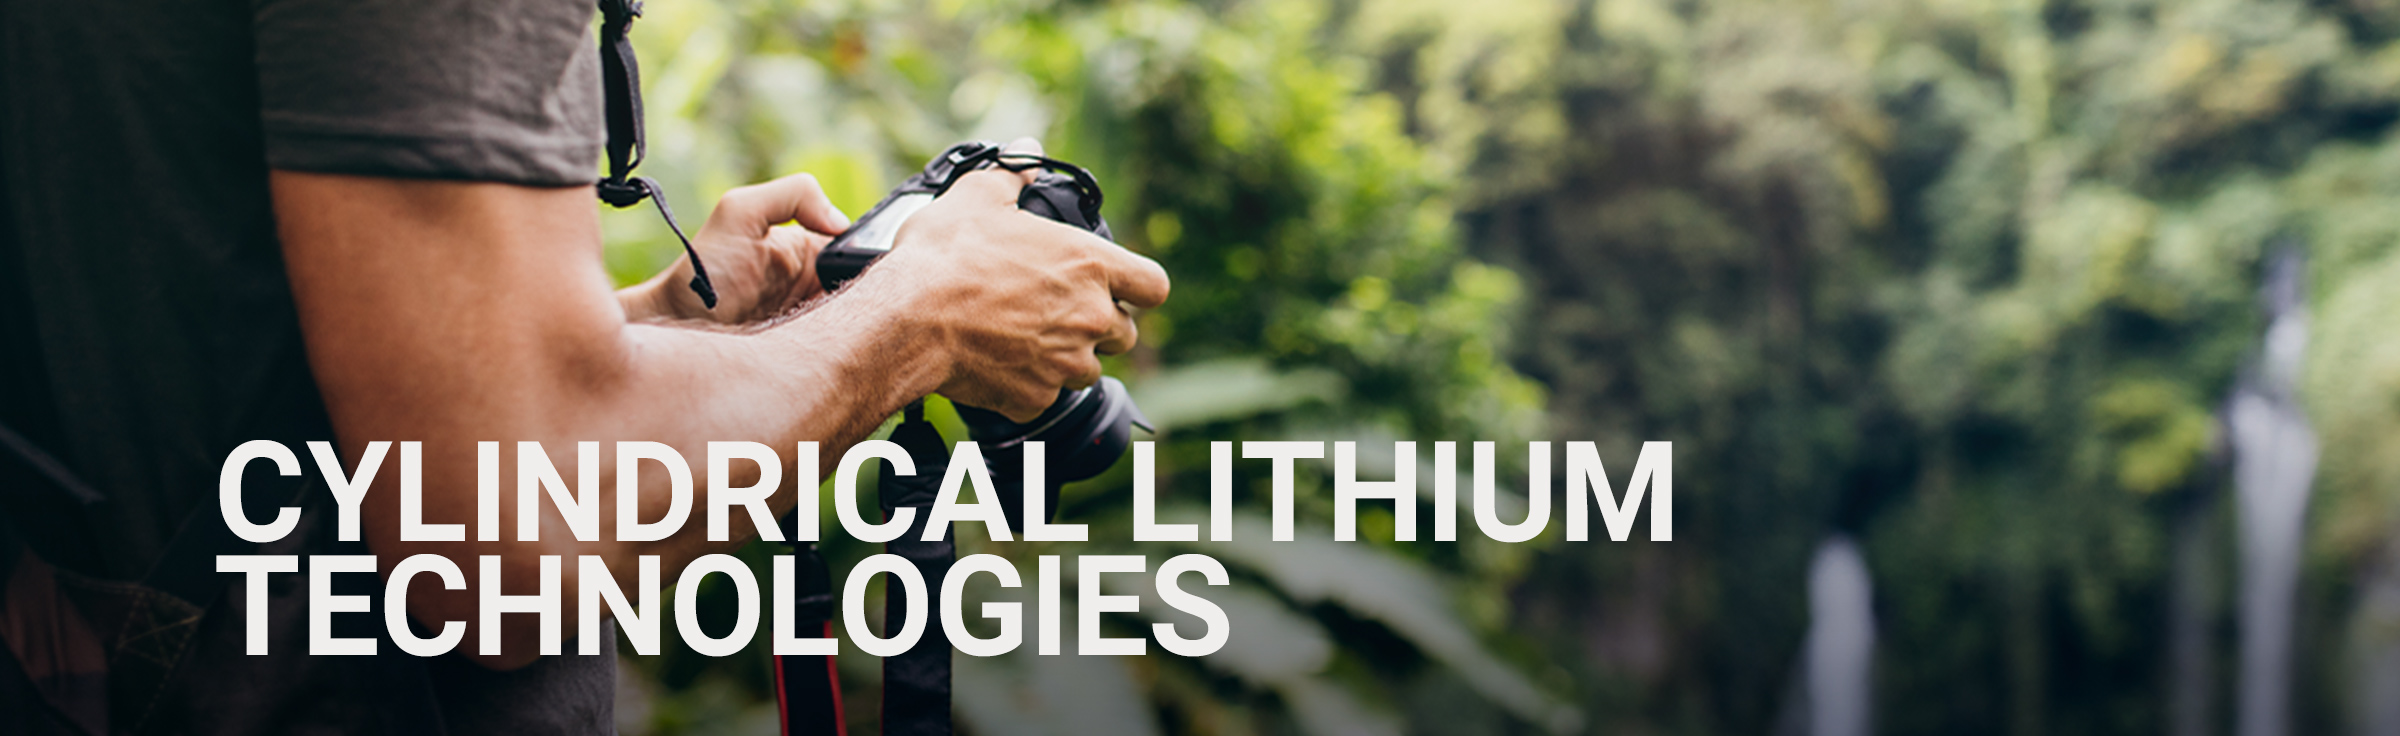 Cylindrical Lithium Technologies